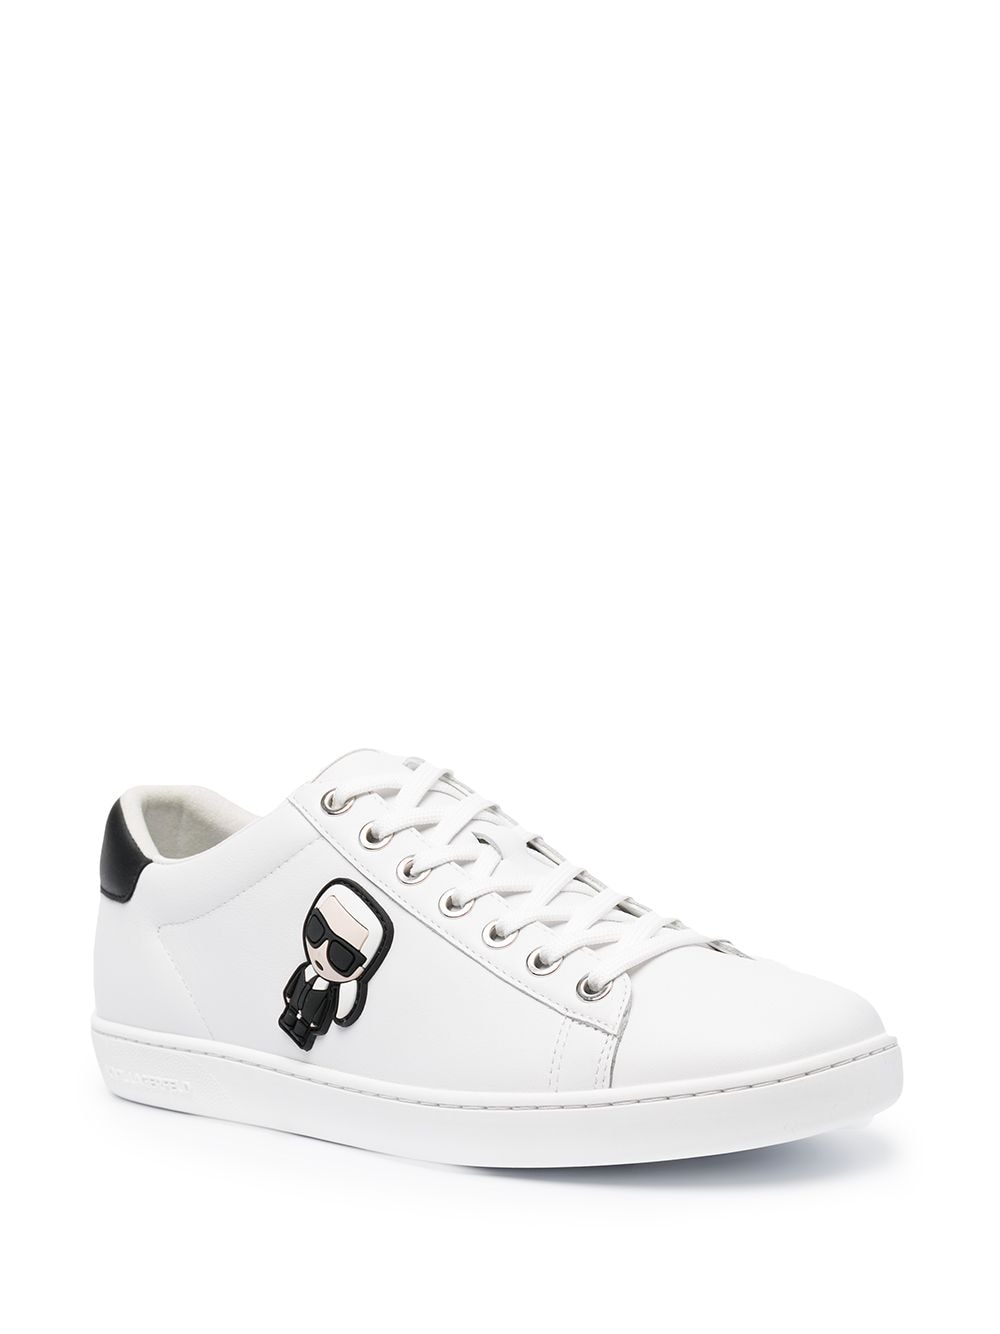 Shop Karl Lagerfeld Kourt 2 low-top sneakers with Express Delivery ...